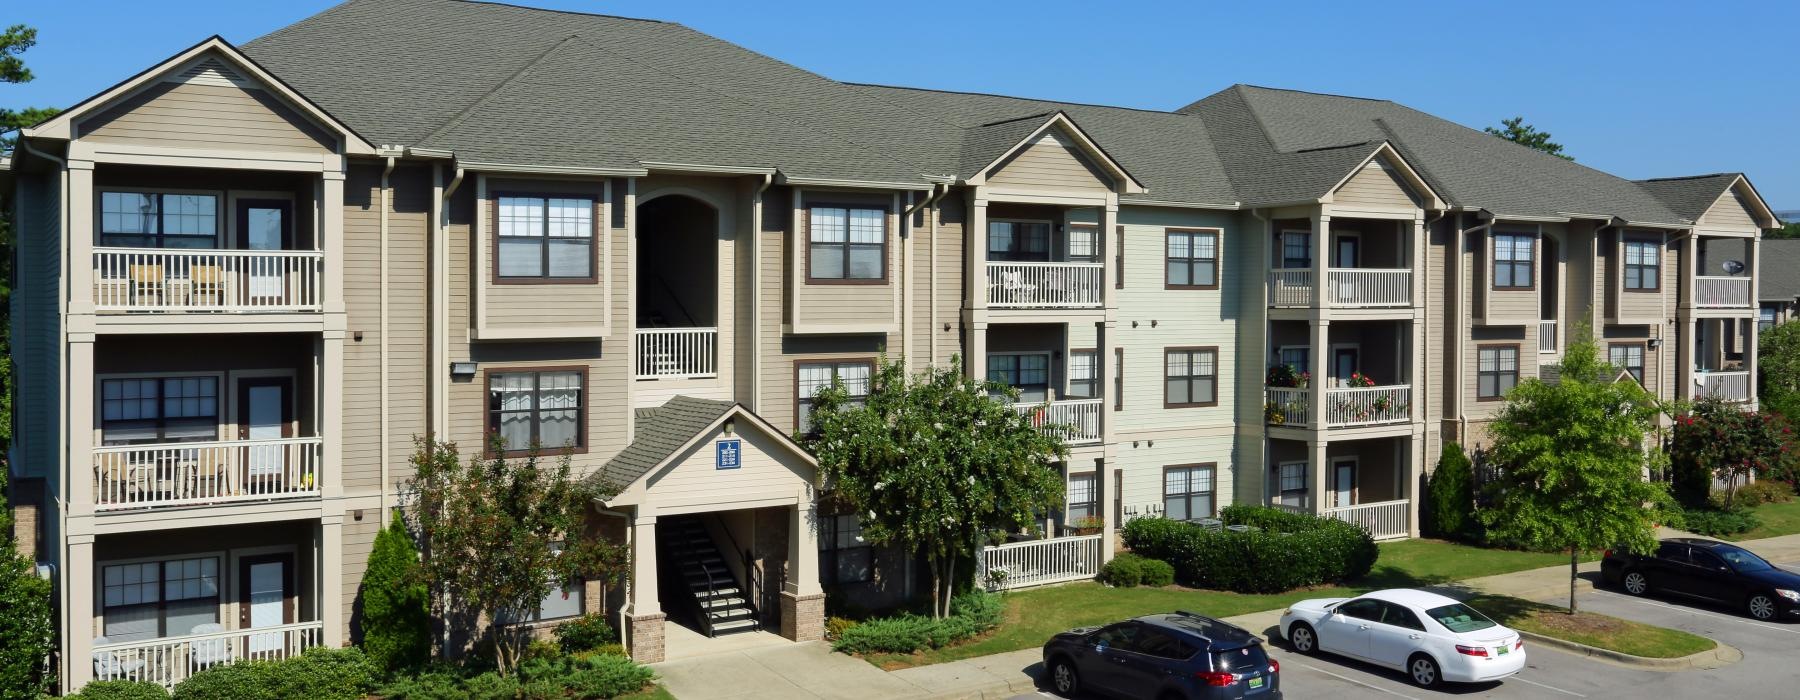 Cahaba Grandview with parking in front of apartments